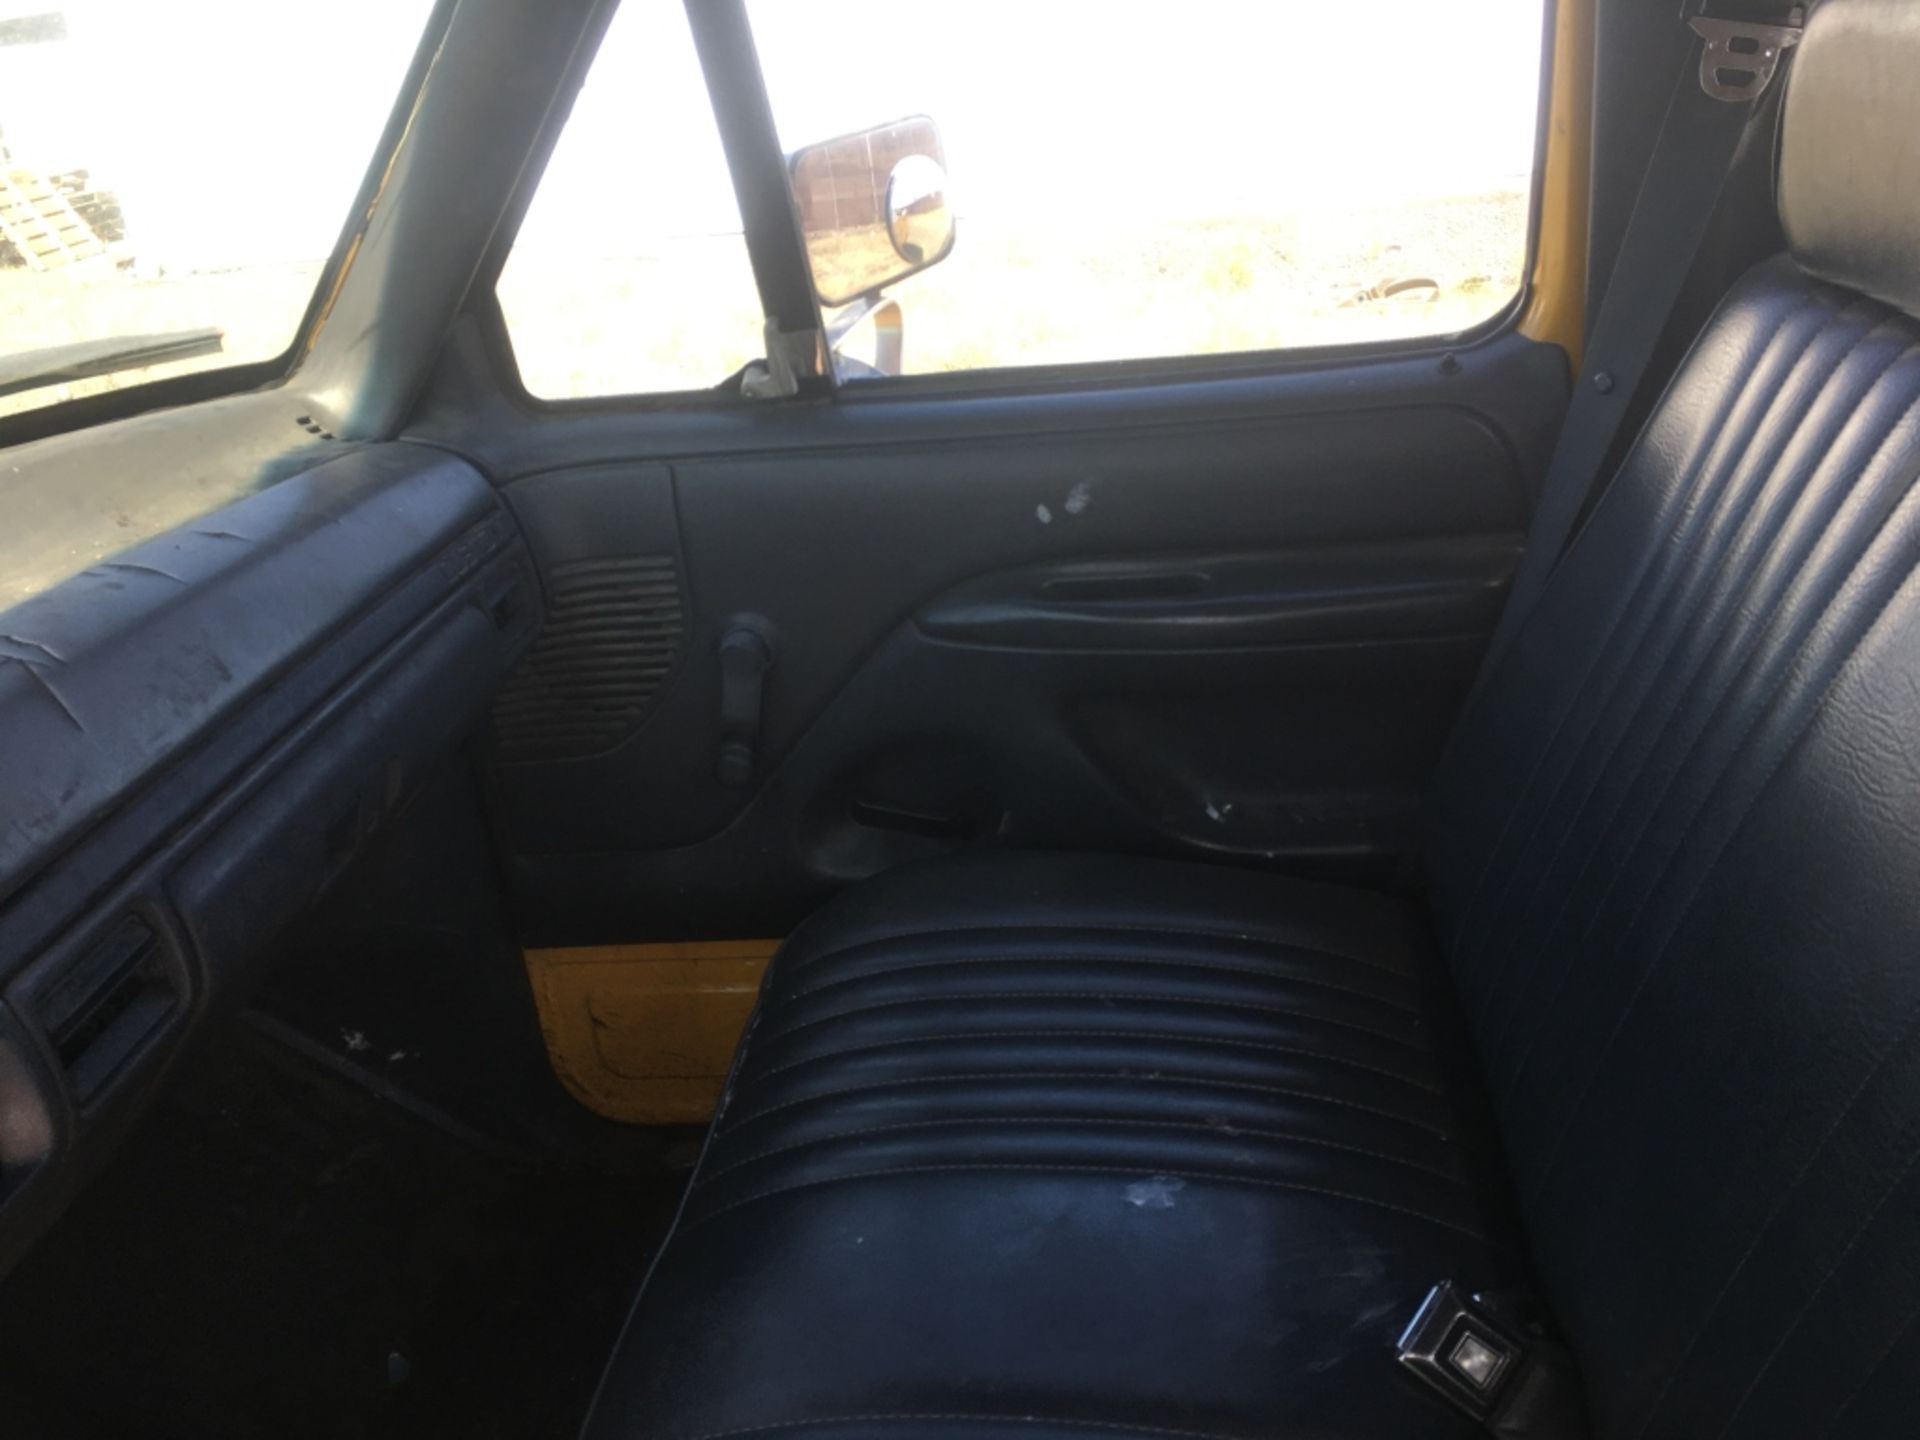 1992 Ford F250 4x4 Pickup - Image 11 of 16